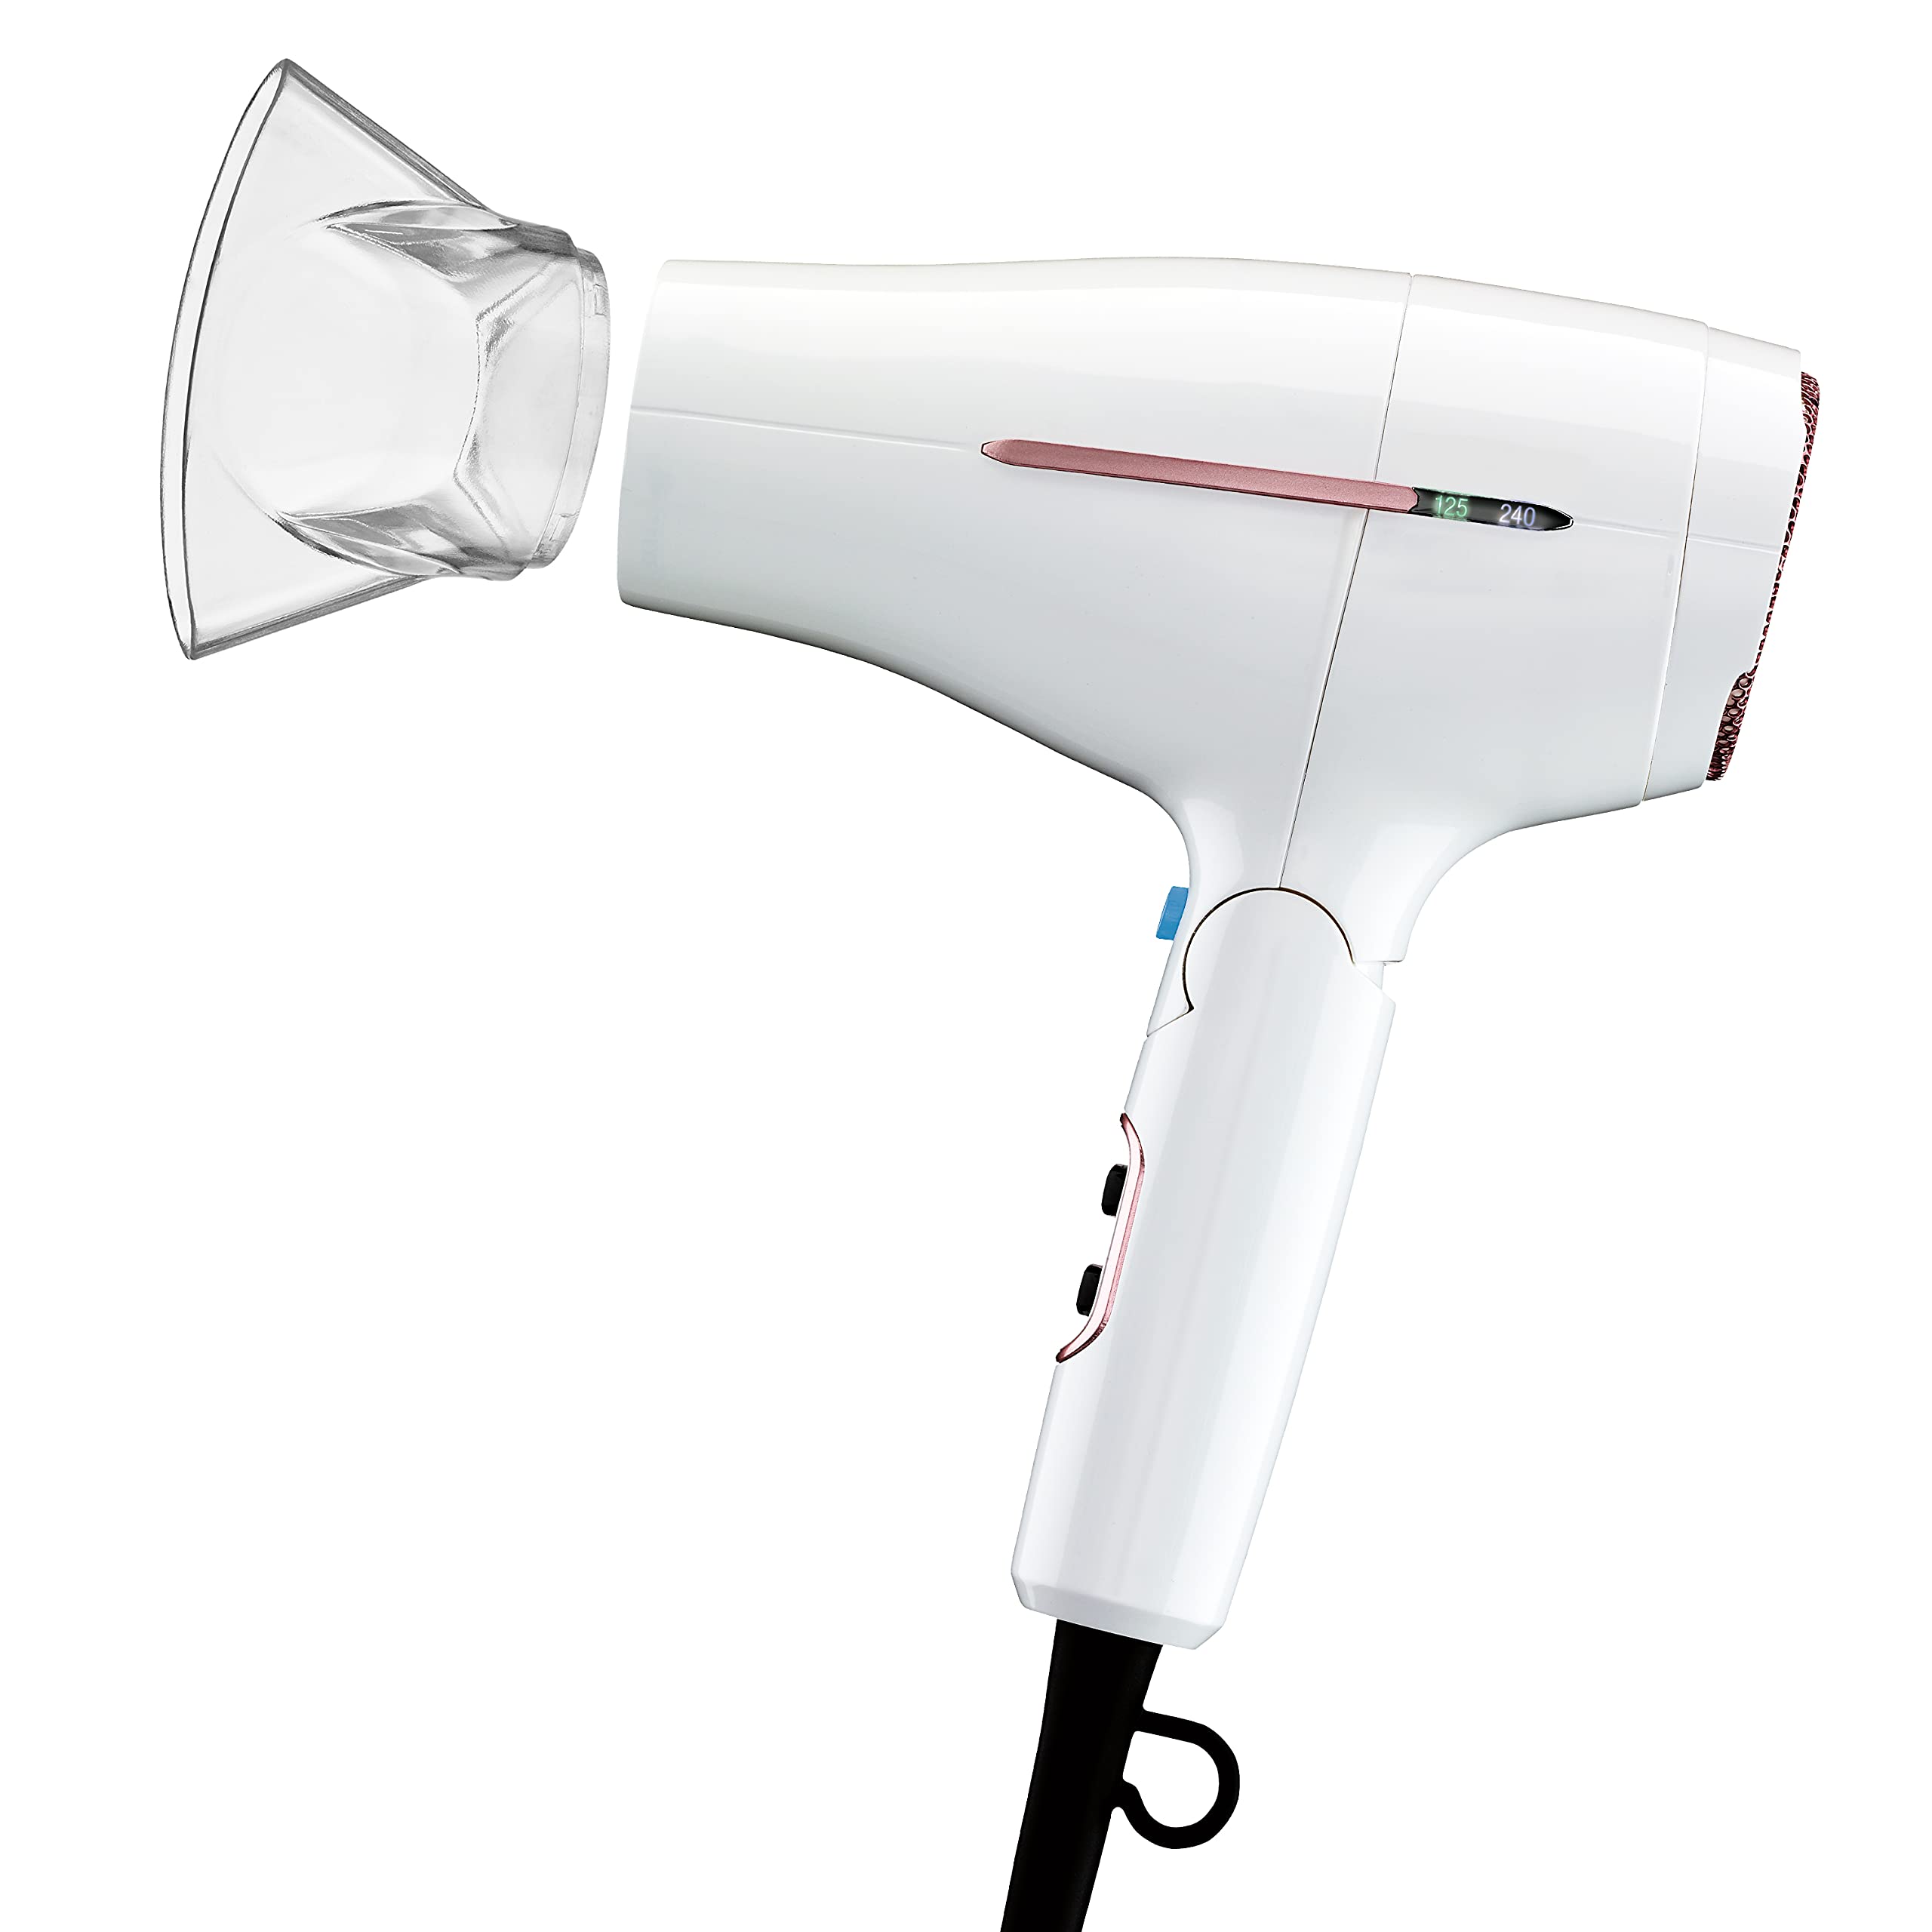 A Chart of 5 Brand Hair Dryer Comparison